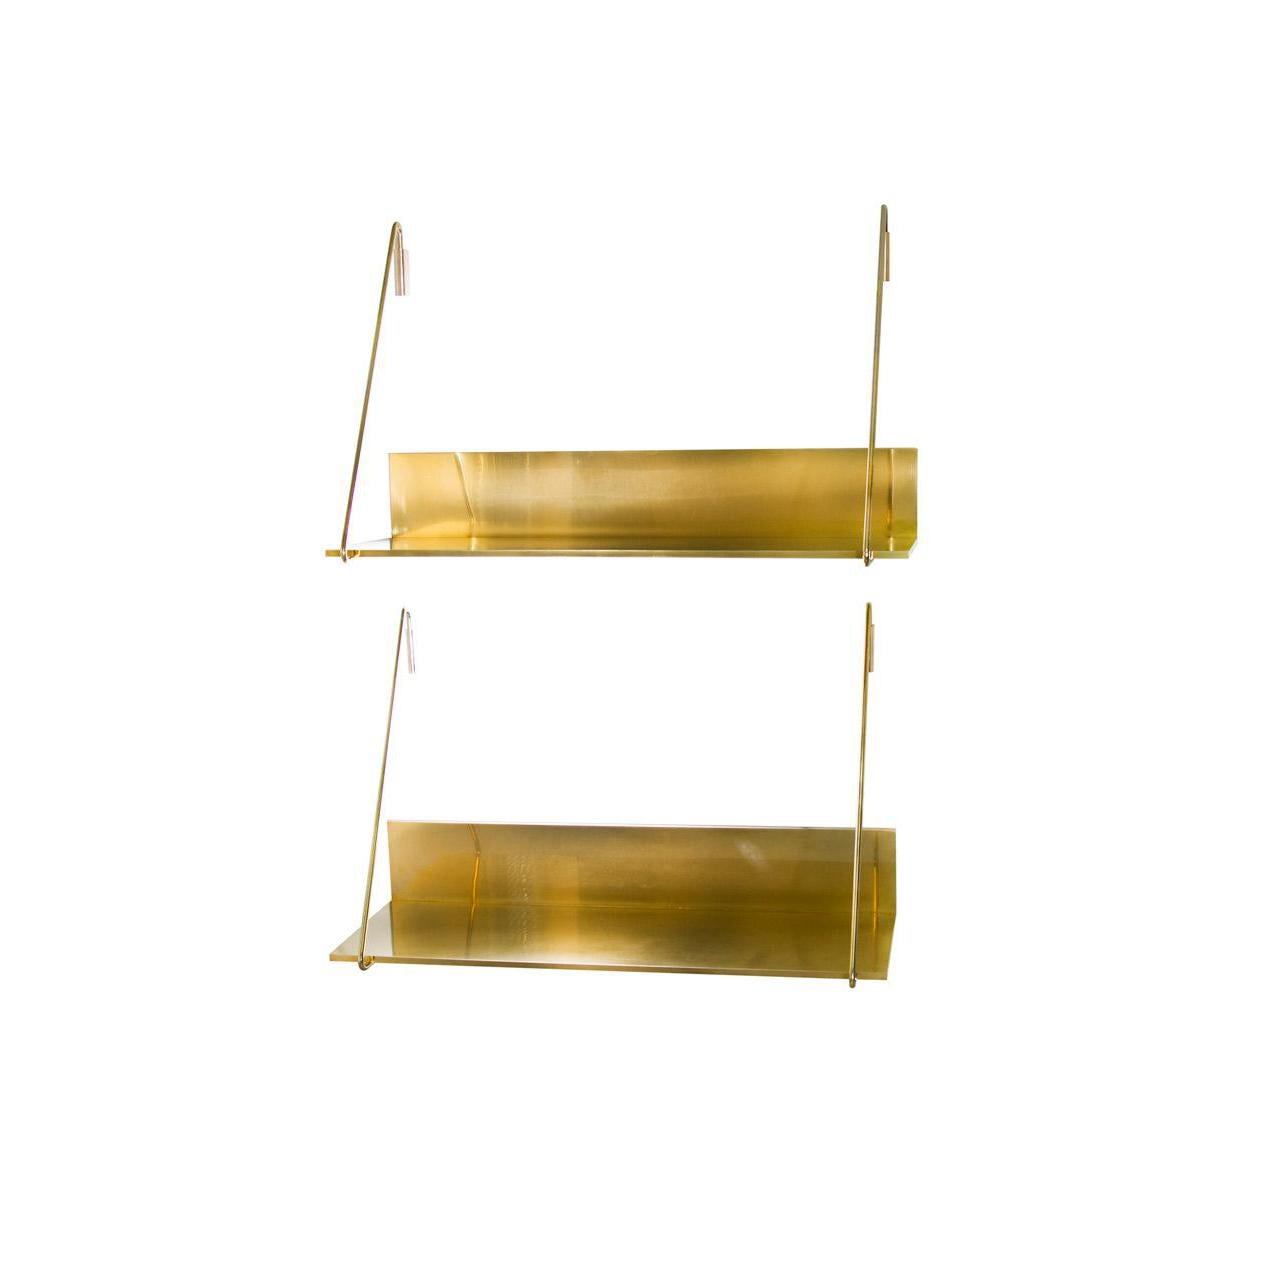 The beauty and simplicity of the MMXVI CS solid polished brass shelf design makes it a perfect compliment for living, bed, bath or office areas. Combination configurations and quantities can be customized. Each self is priced individually.